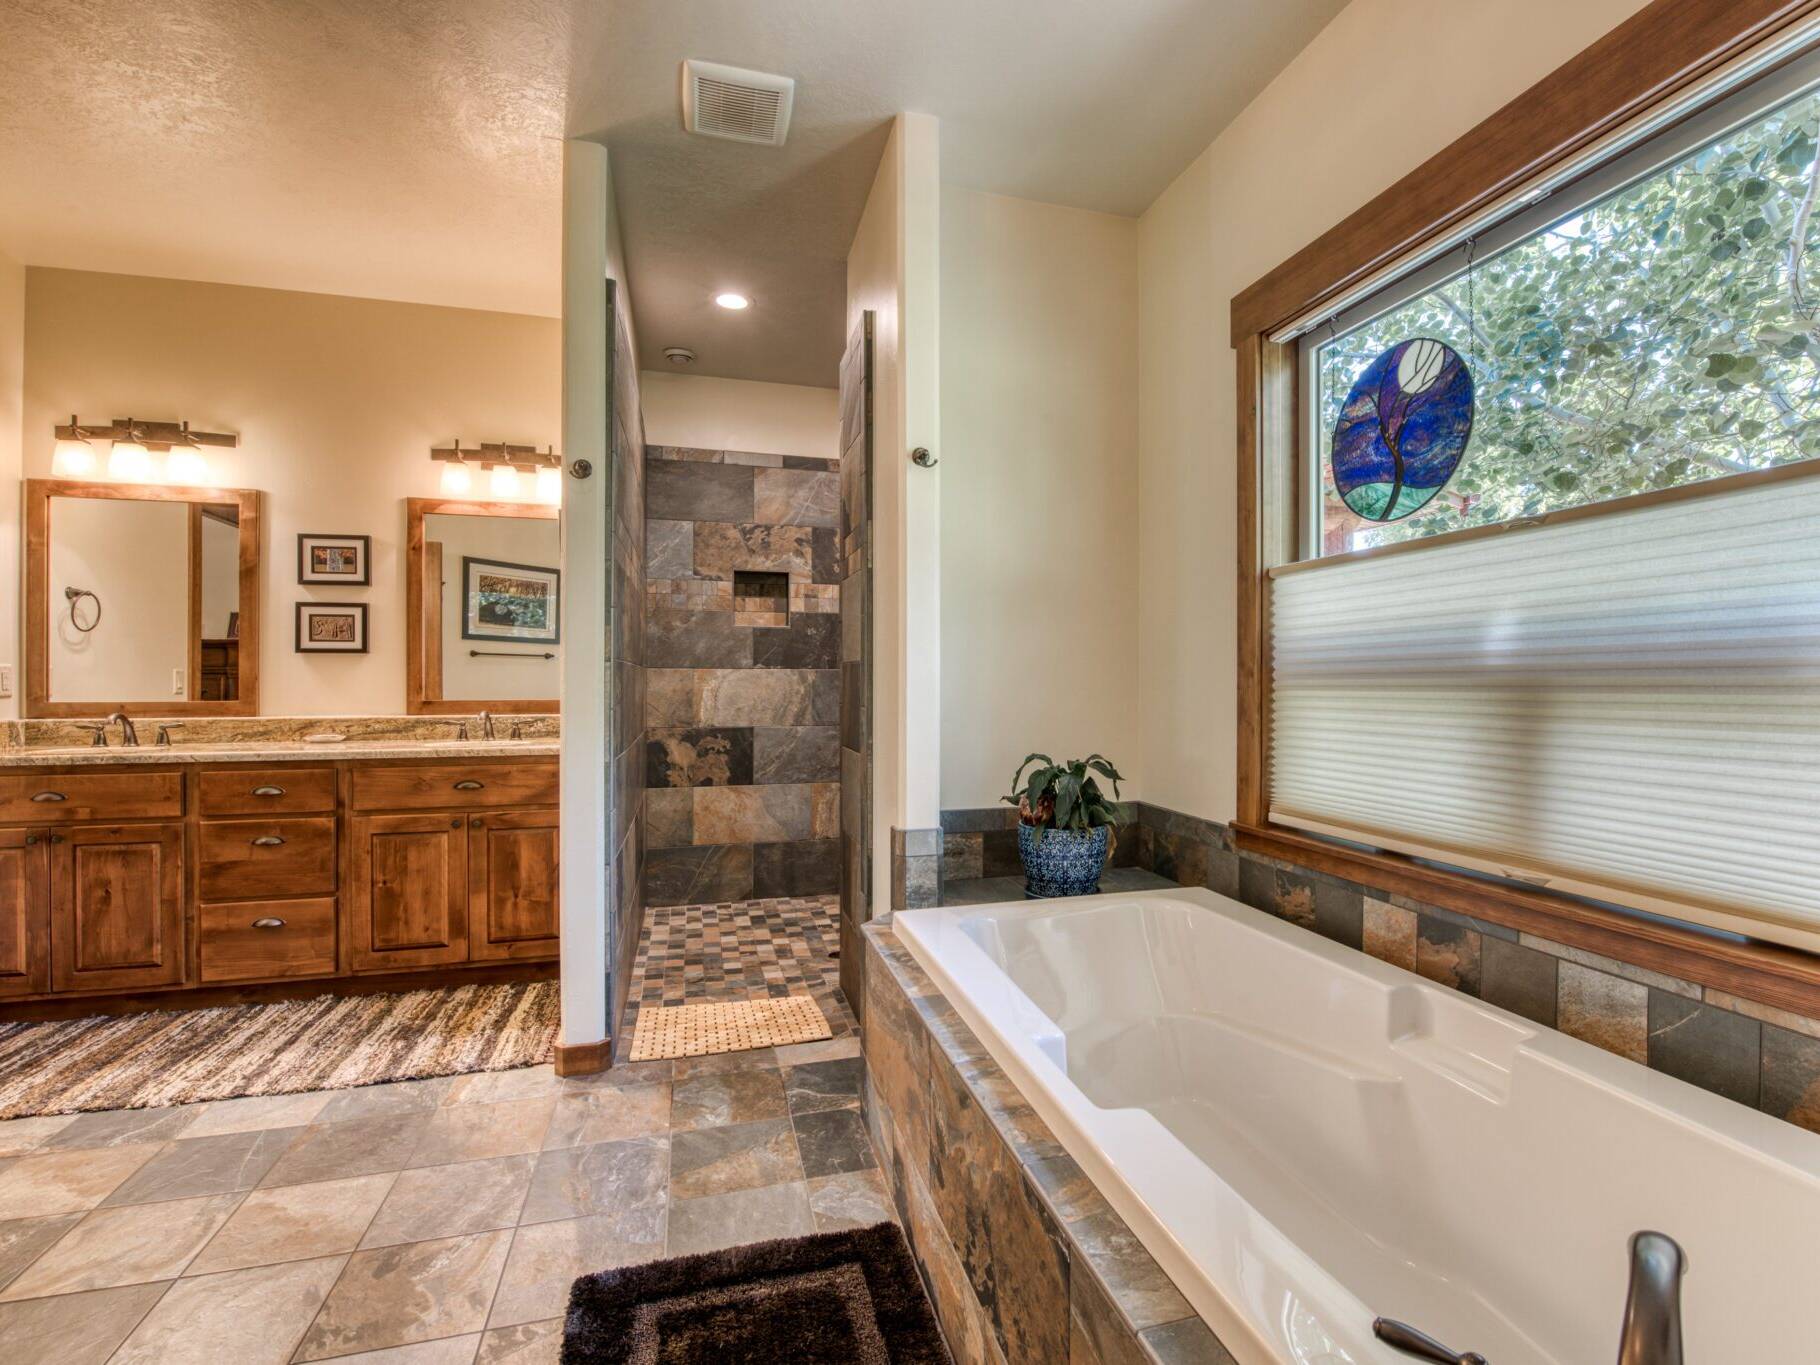 Master bathroom with tile floors, tile shower, granite countertops, soaking tub set in a tiled tub deck with a large window in a custom home near Hamilton, MT